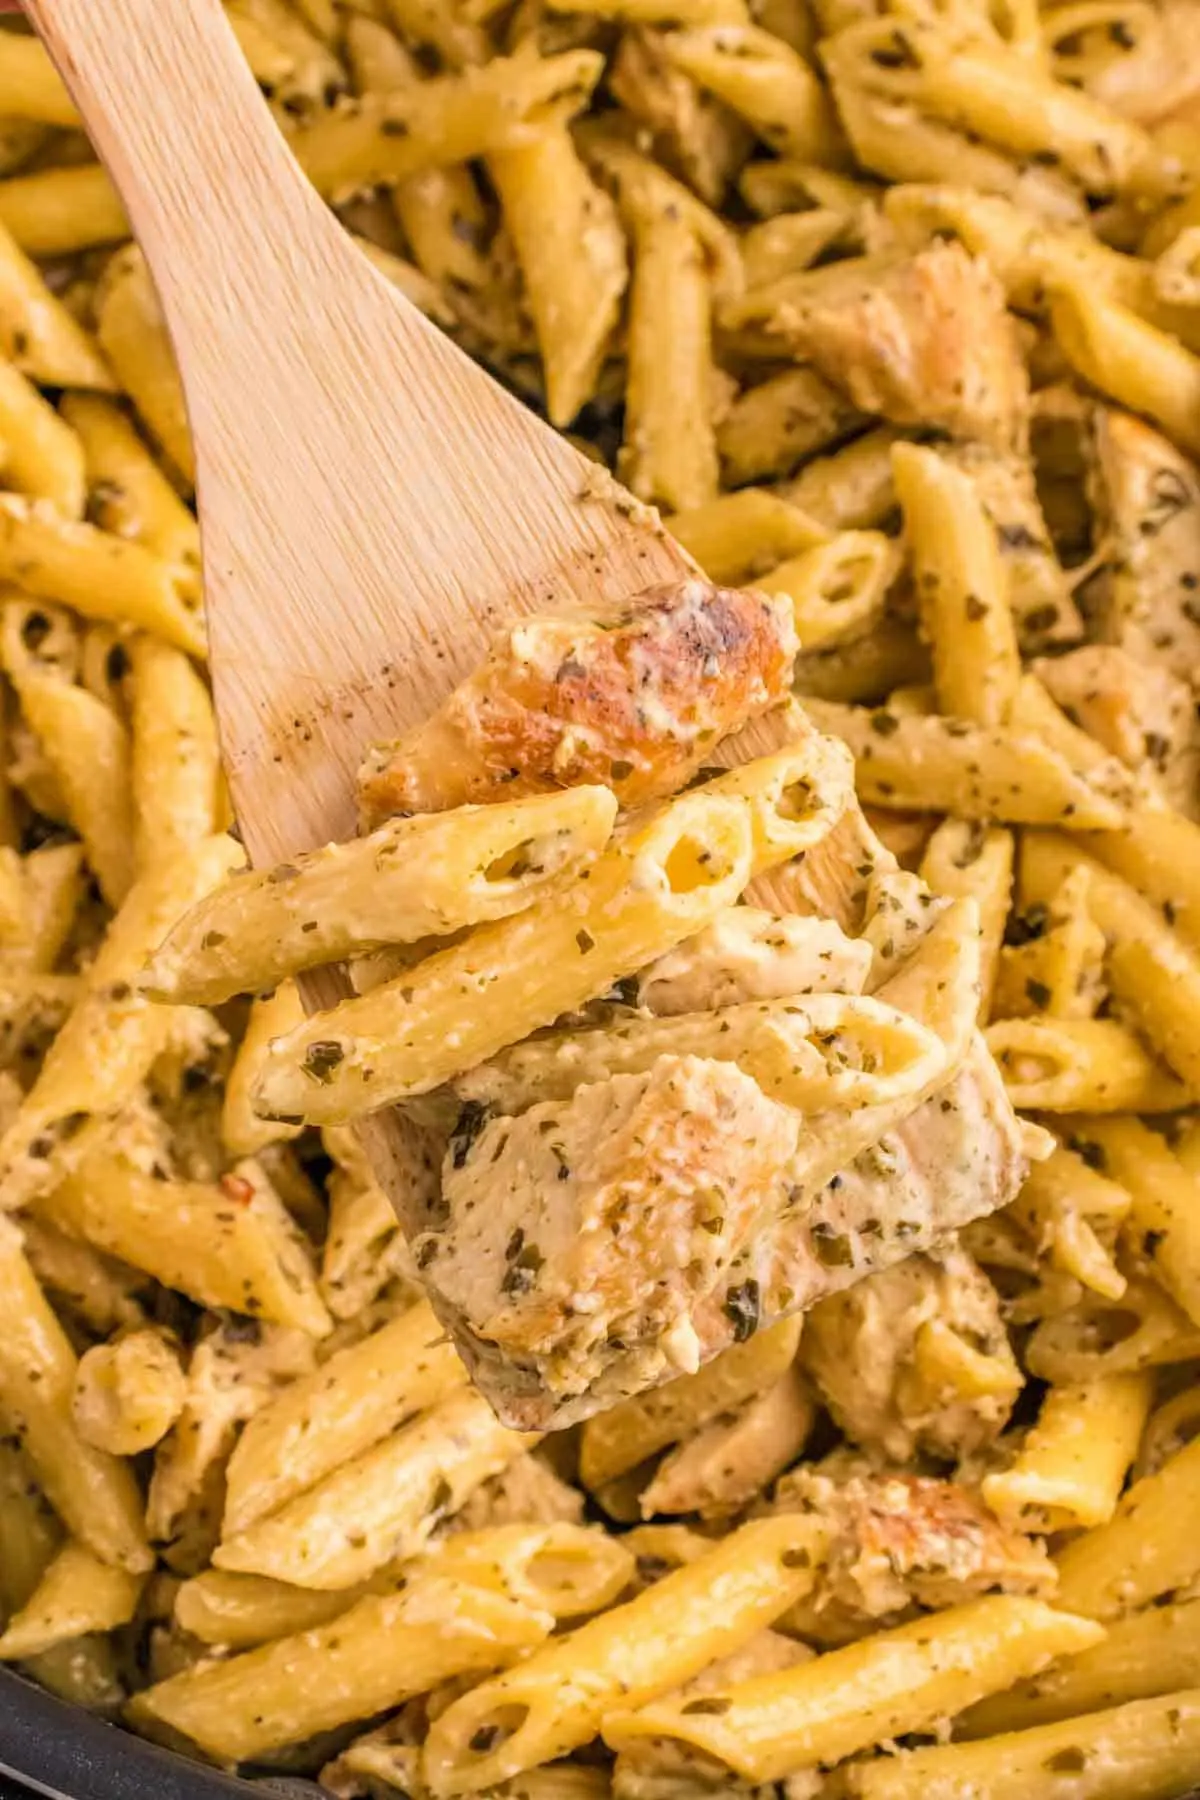 Pesto Chicken Pasta is a flavourful pasta recipe loaded with seasoned chicken breast chunks, basil pesto, heavy cream and topped with roasted pine nuts.